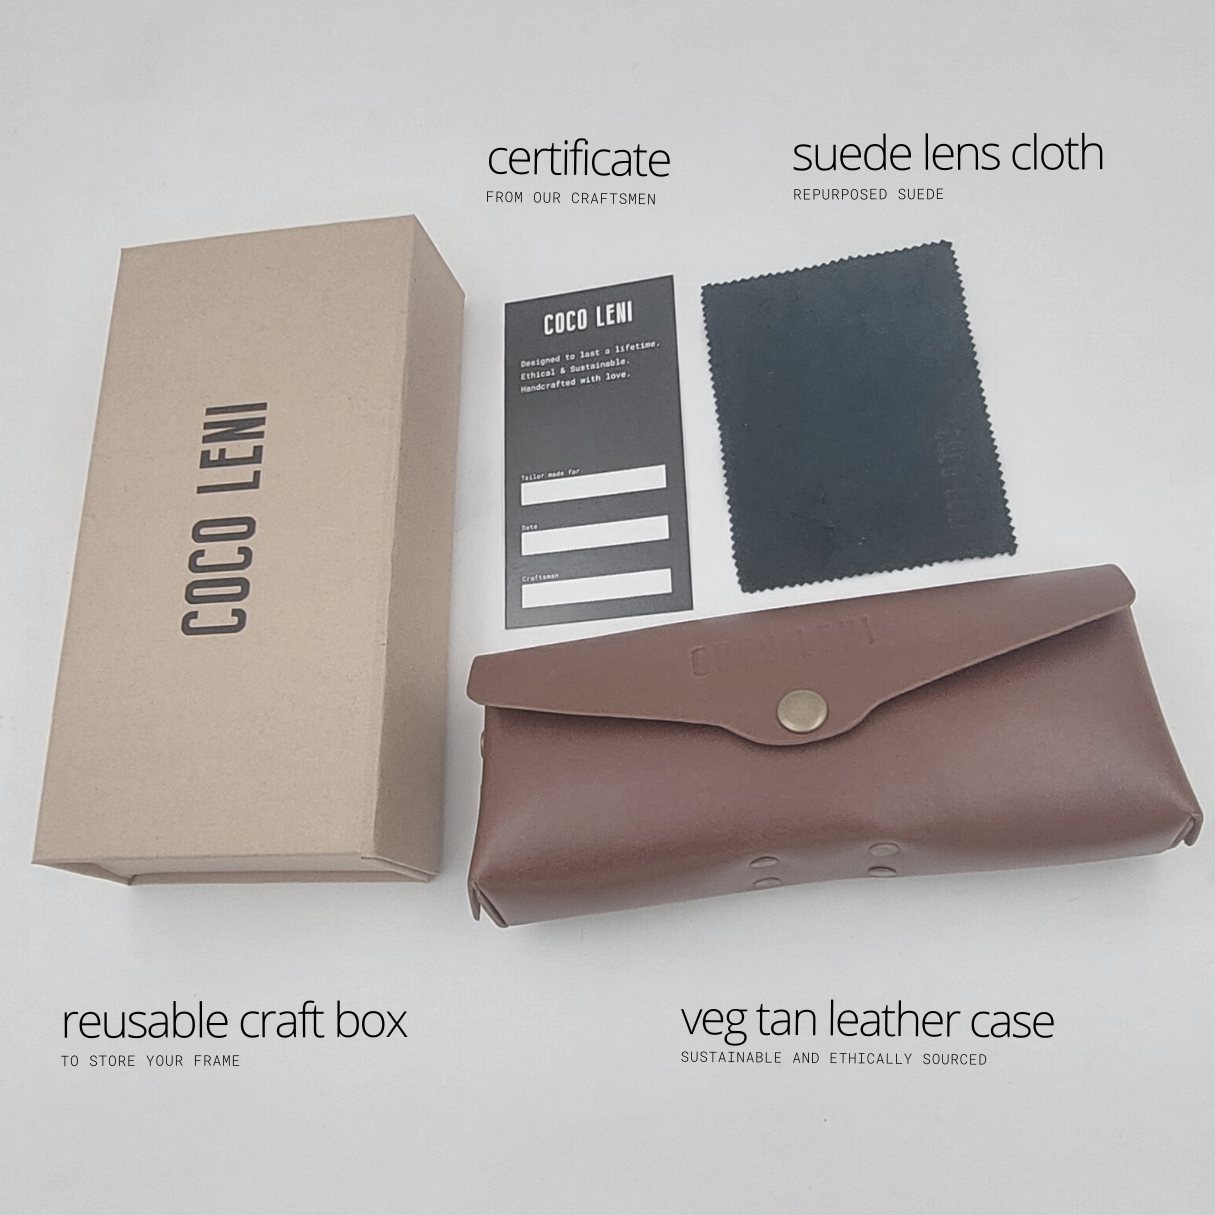 Lech Our Packaging